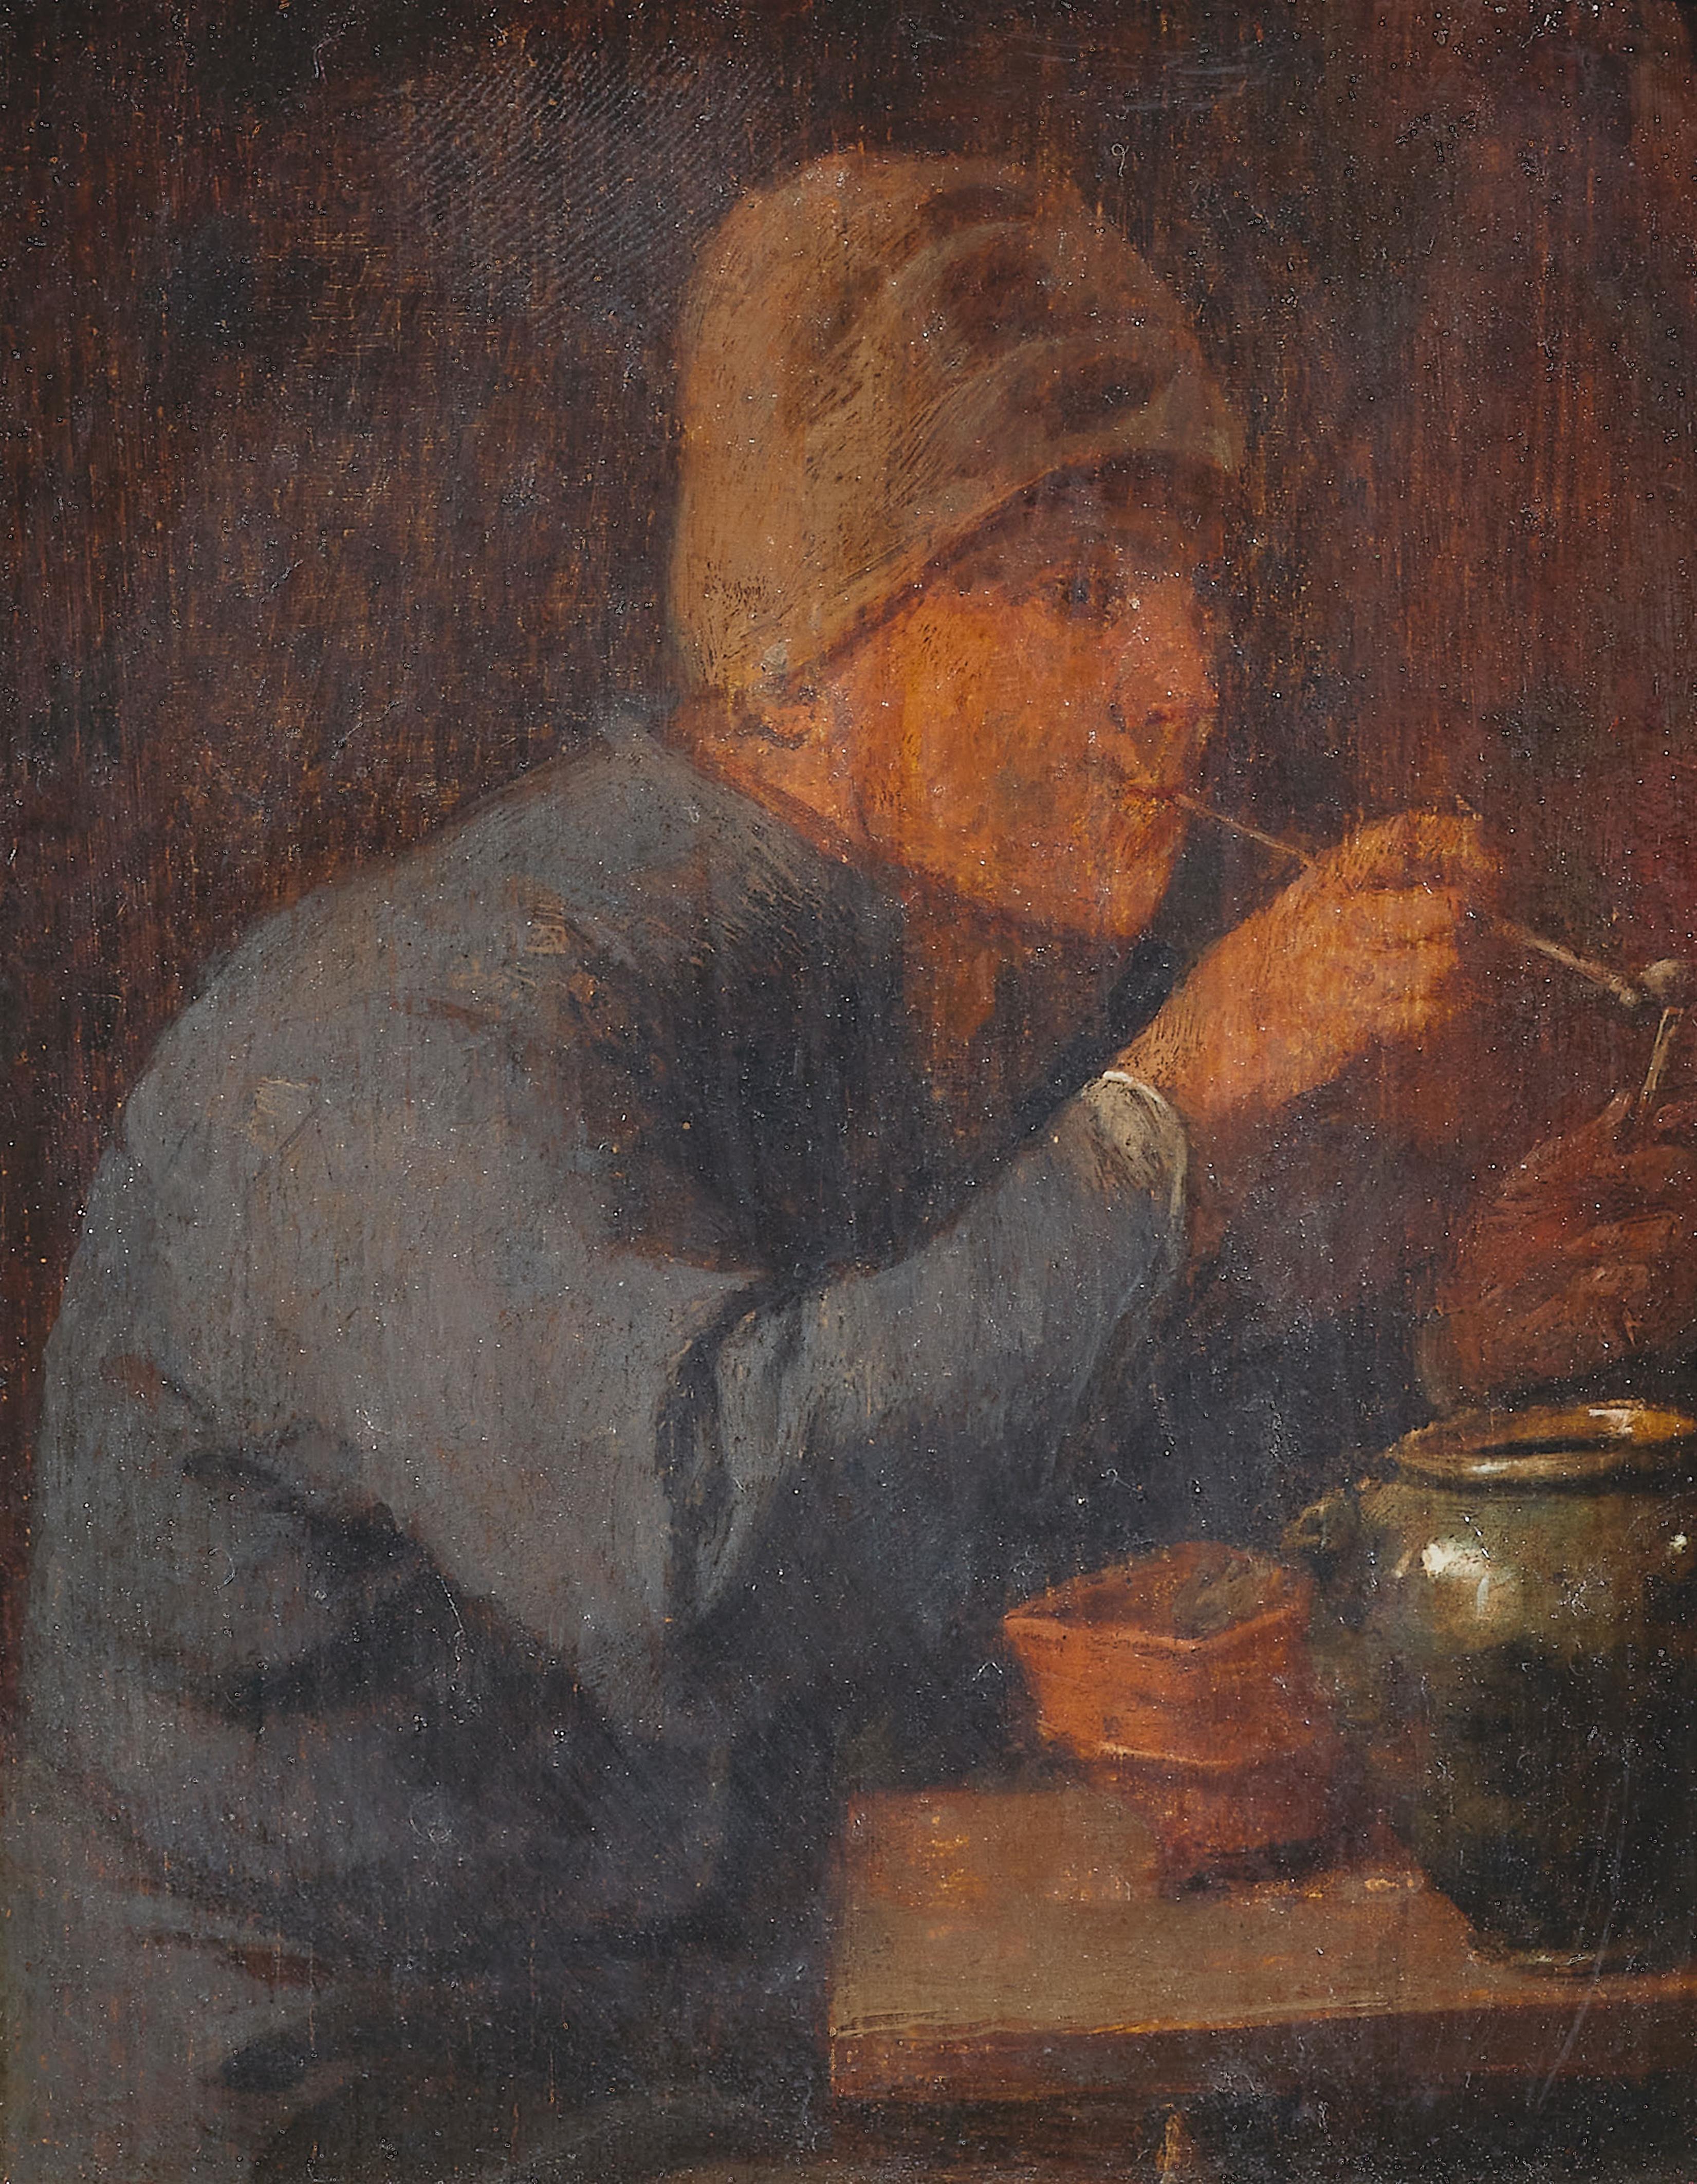 Adriaen Brouwer, attributed to - A Smoker (The Sense of Taste) - image-1